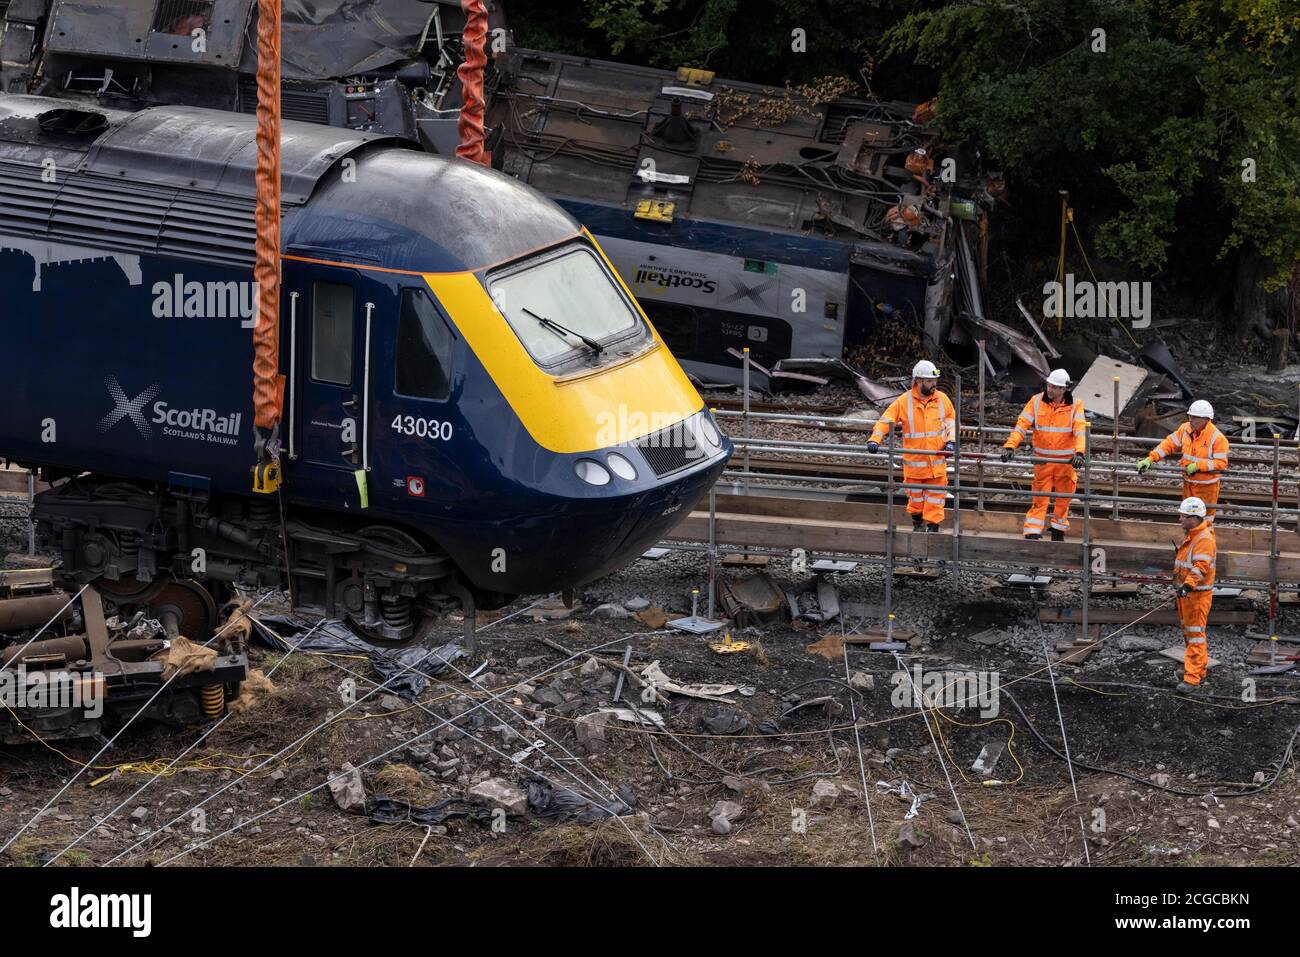 A carriage is lifted by crane from the site of the Stonehaven rail crash as work continues at the scene in Aberdeenshire, following the derailment of the ScotRail train which cost the lives of three people on Wednesday August 12. Stock Photo